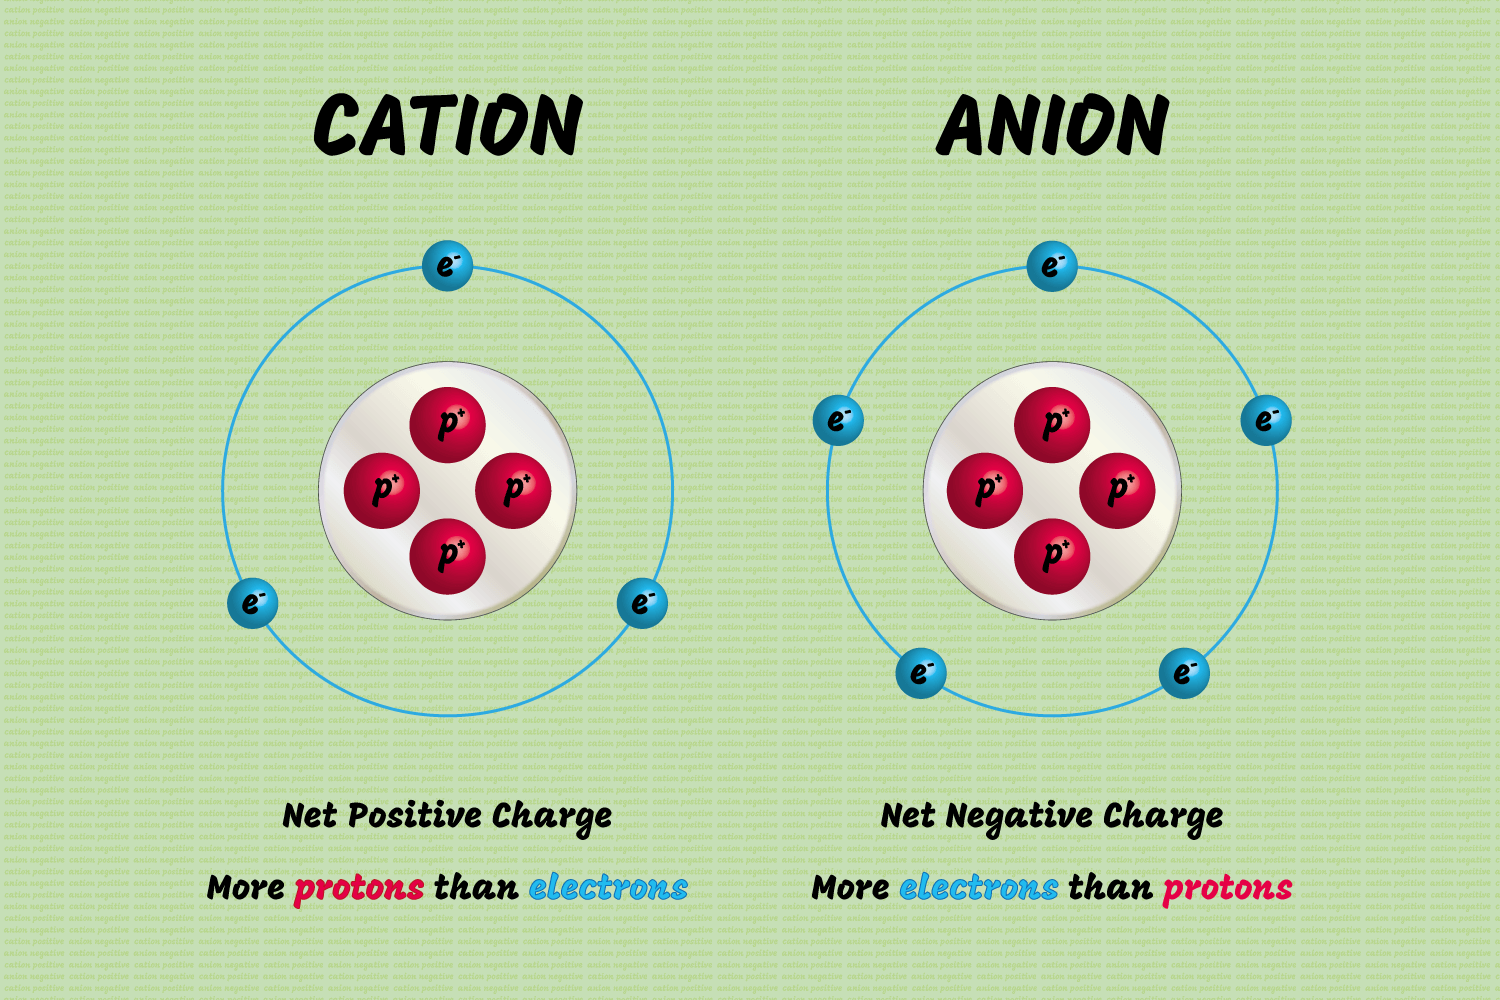 Cations and Anions: Definitions, Examples, and Differences